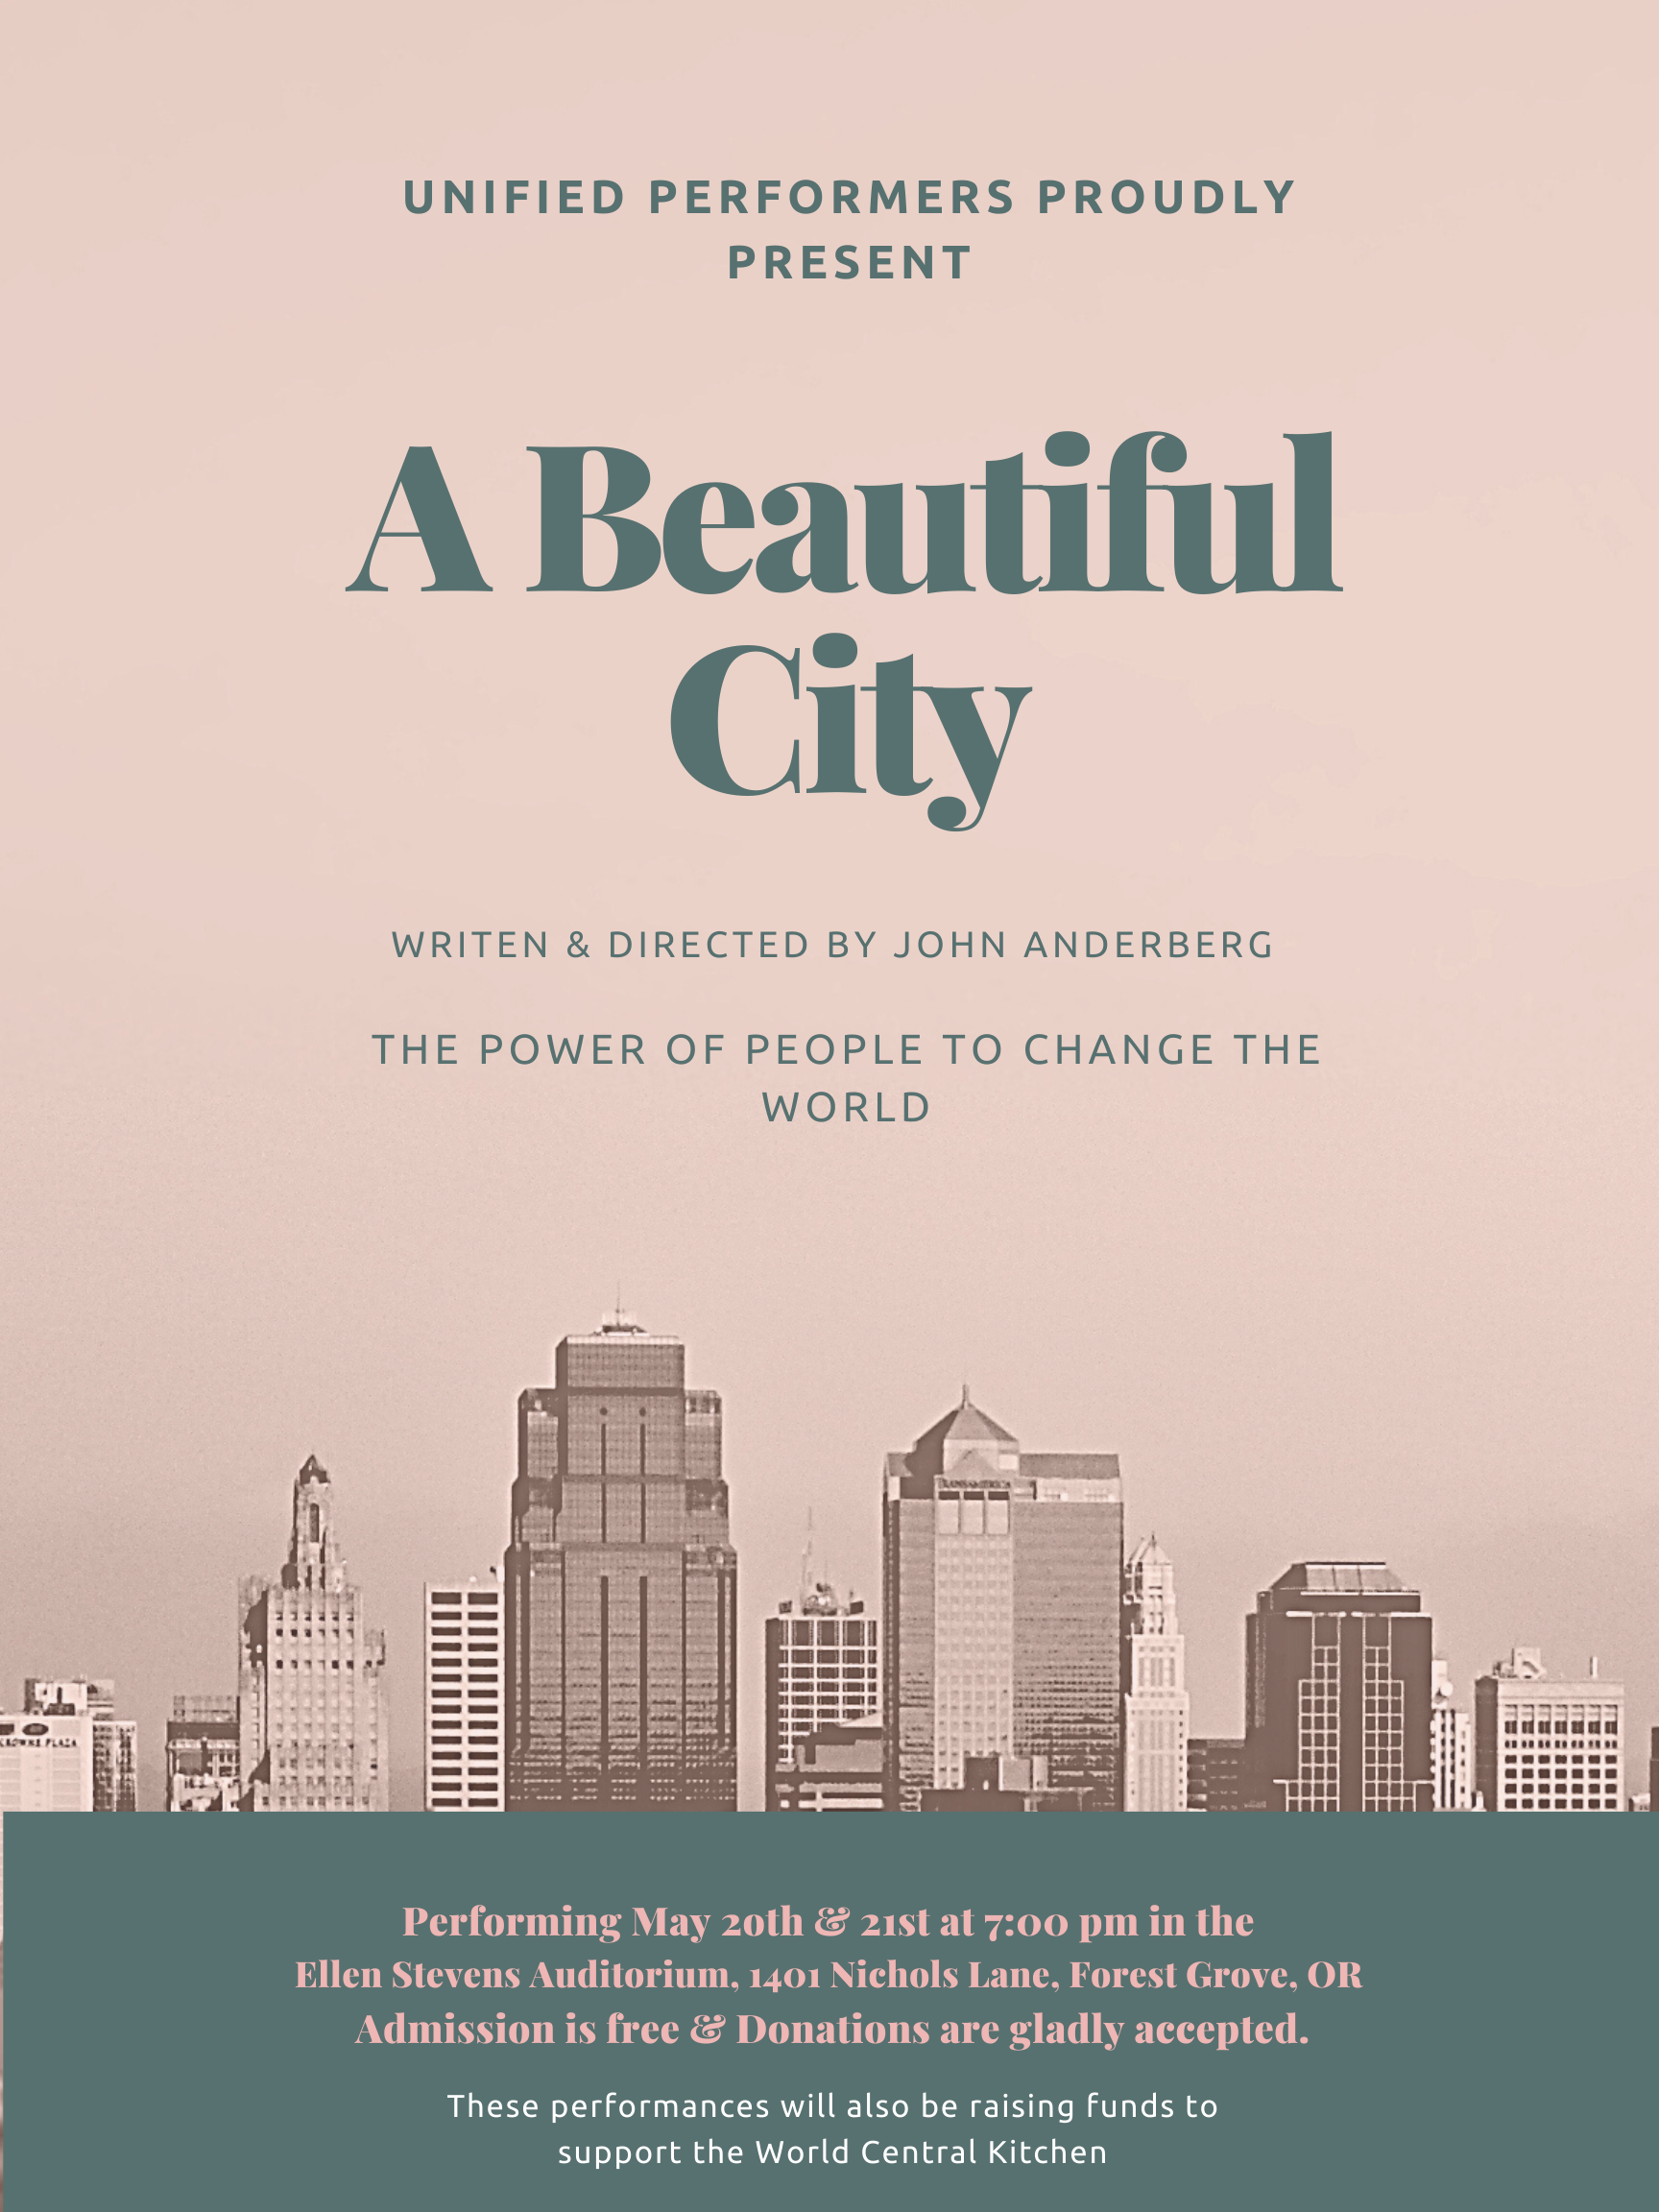 A beautiful city play poster: pink background with a city landscape in the foreground